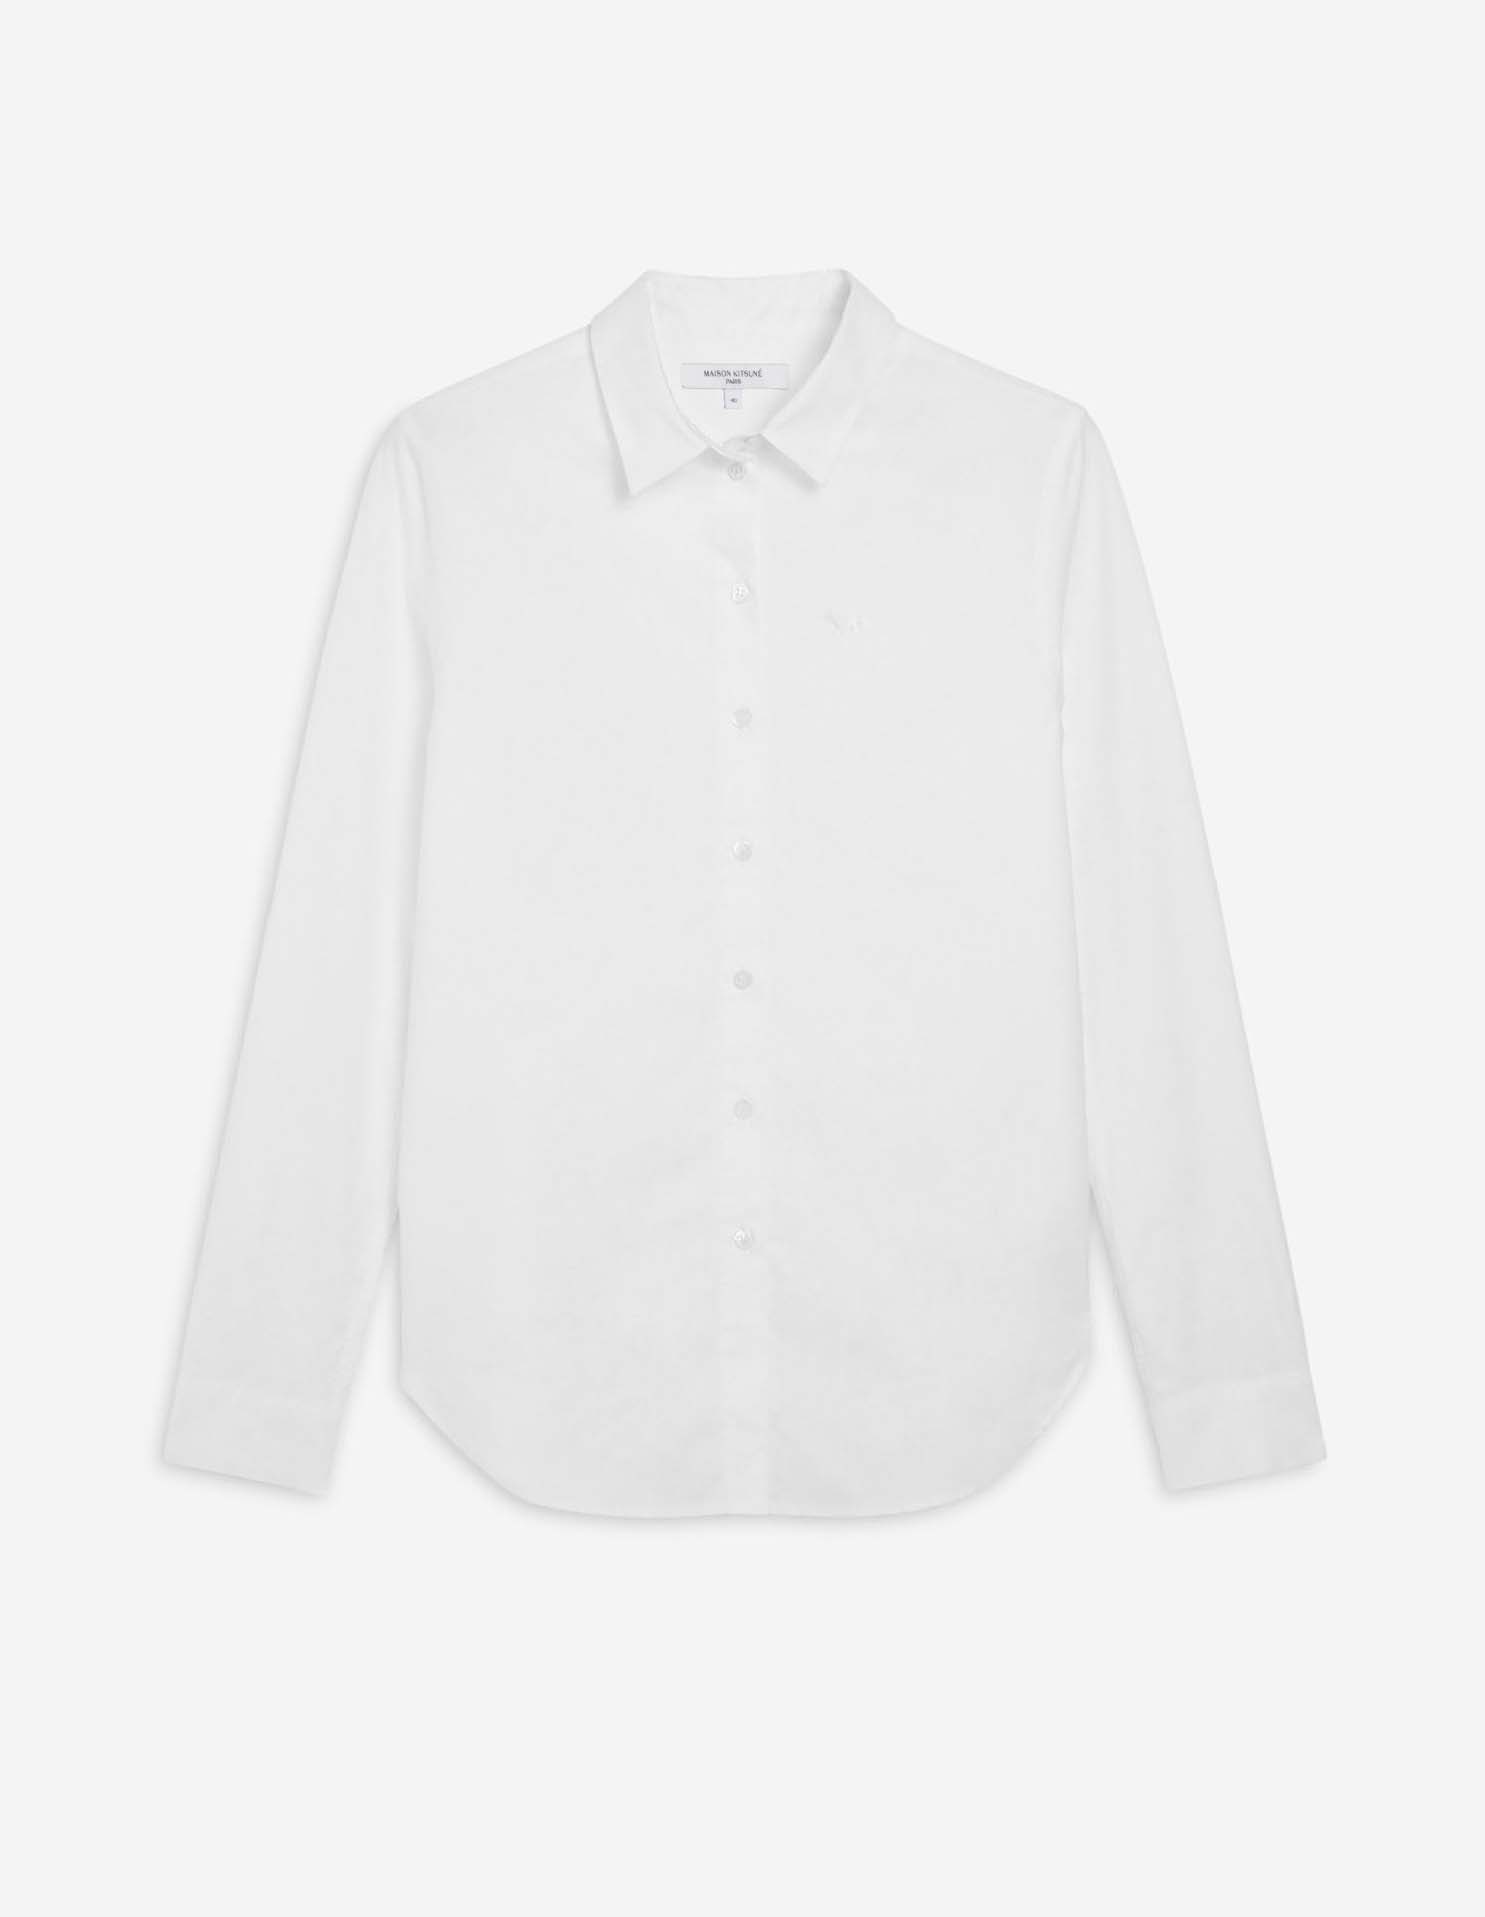 FOX EMBROIDERY CLASSIC SHIRT